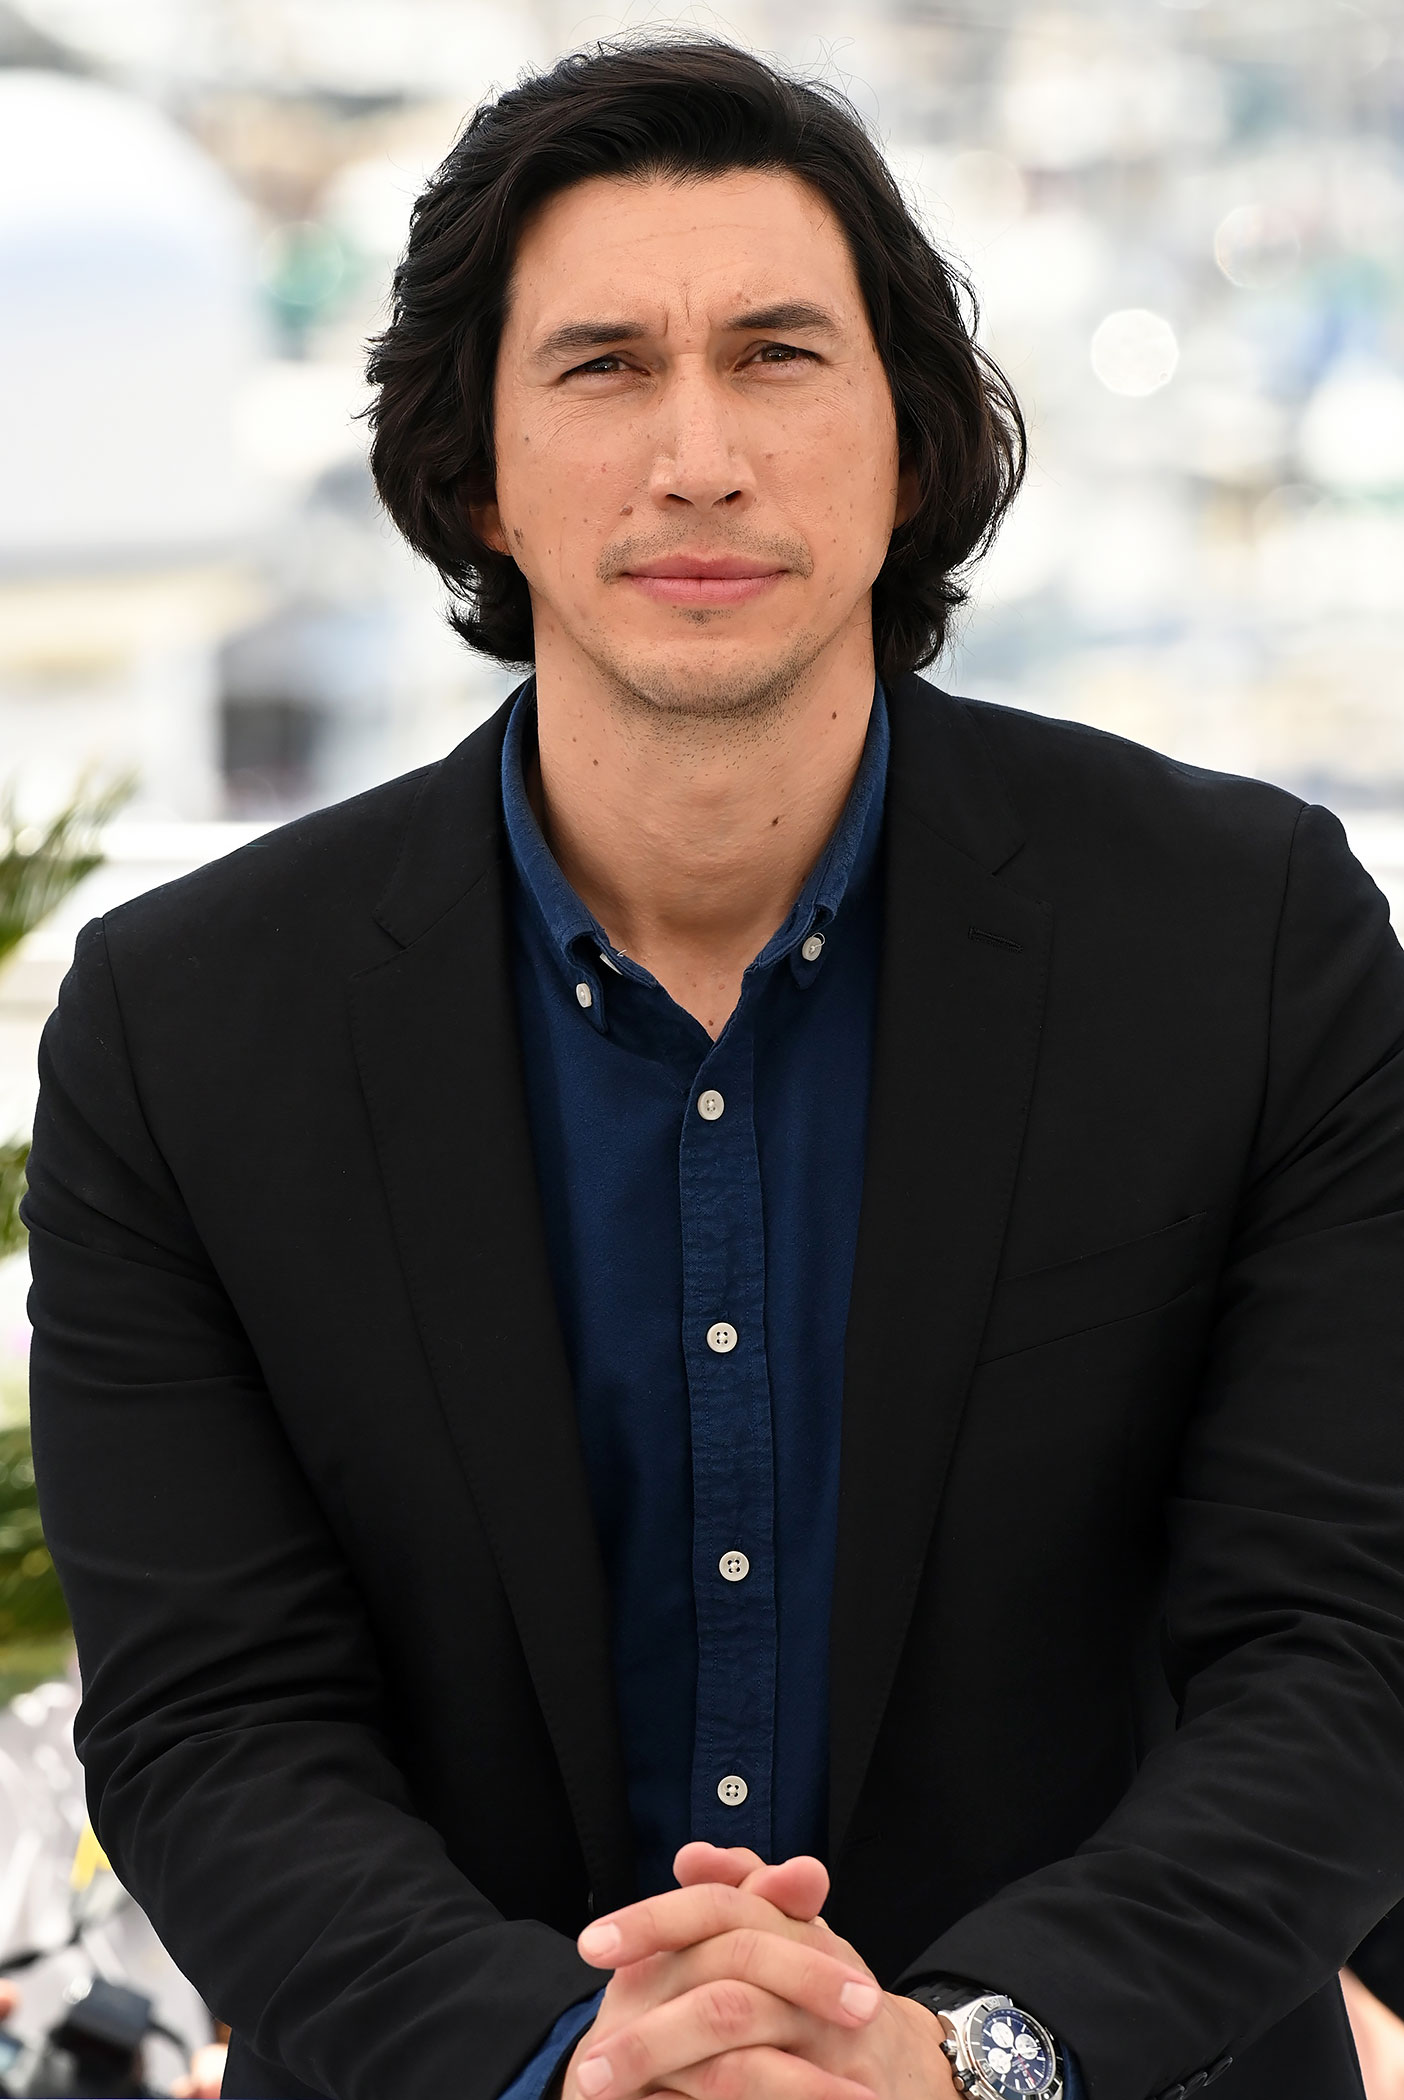 Adam Driver Is the Face of Burberry's New Fragrance: Details